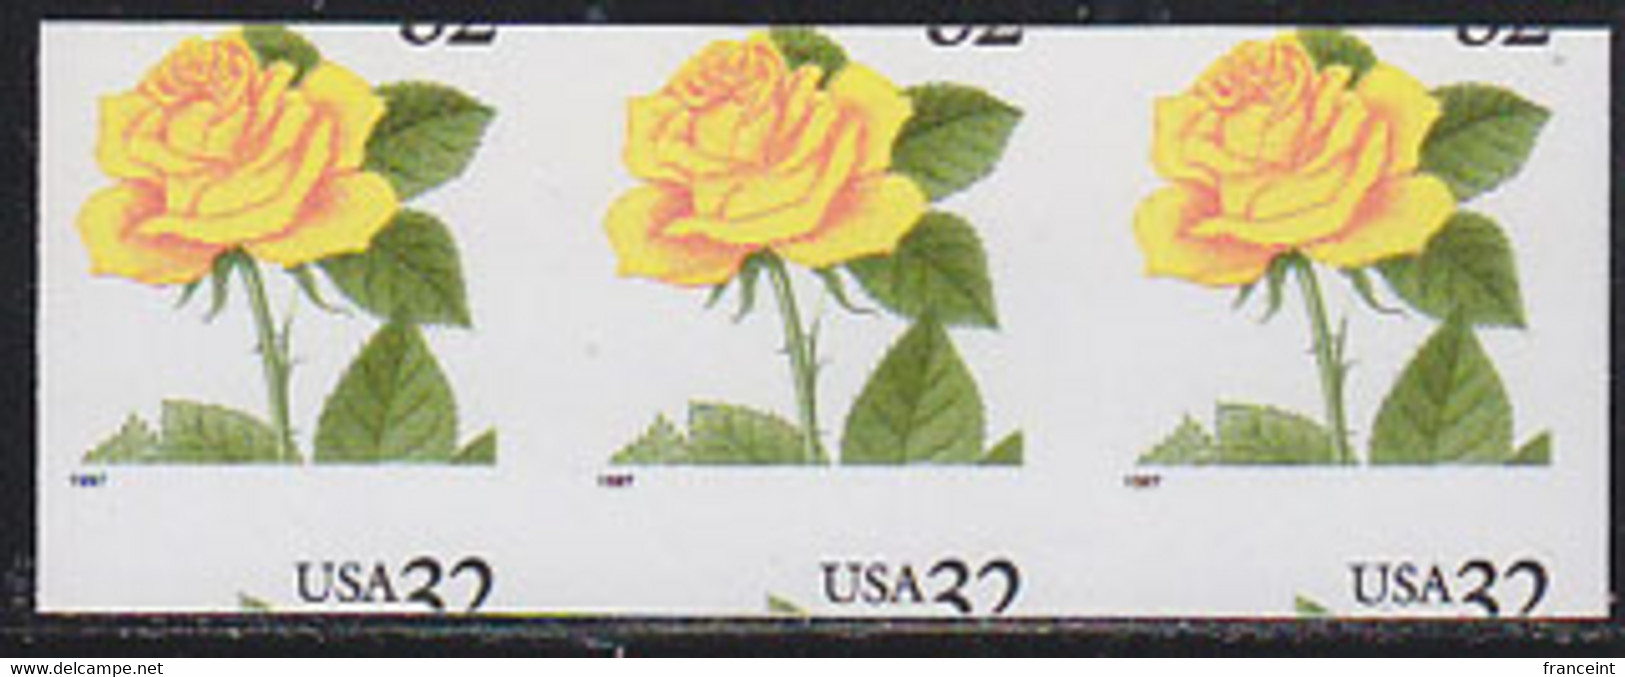 U.S.A. (1996) Yellow Rose. Strip Pf 3 Horizontally Miscut In And Missing Die Cuts. Scott No 3054, Yvert No 2568. Rare! - Errors, Freaks & Oddities (EFOs)